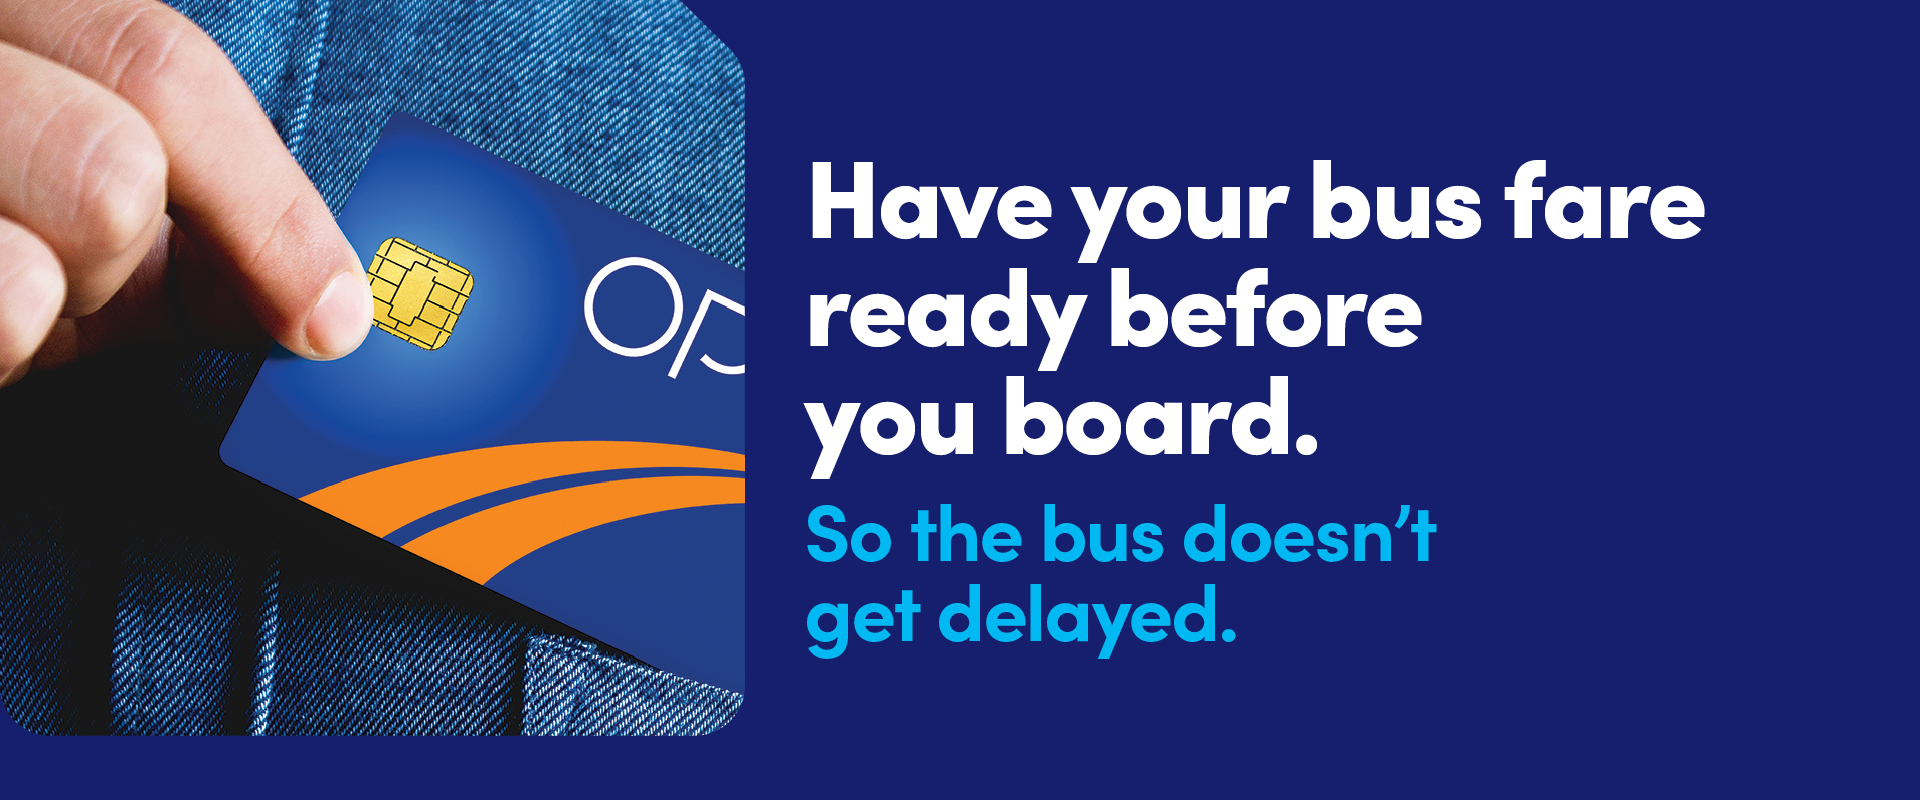 Have your bus fare ready before you board